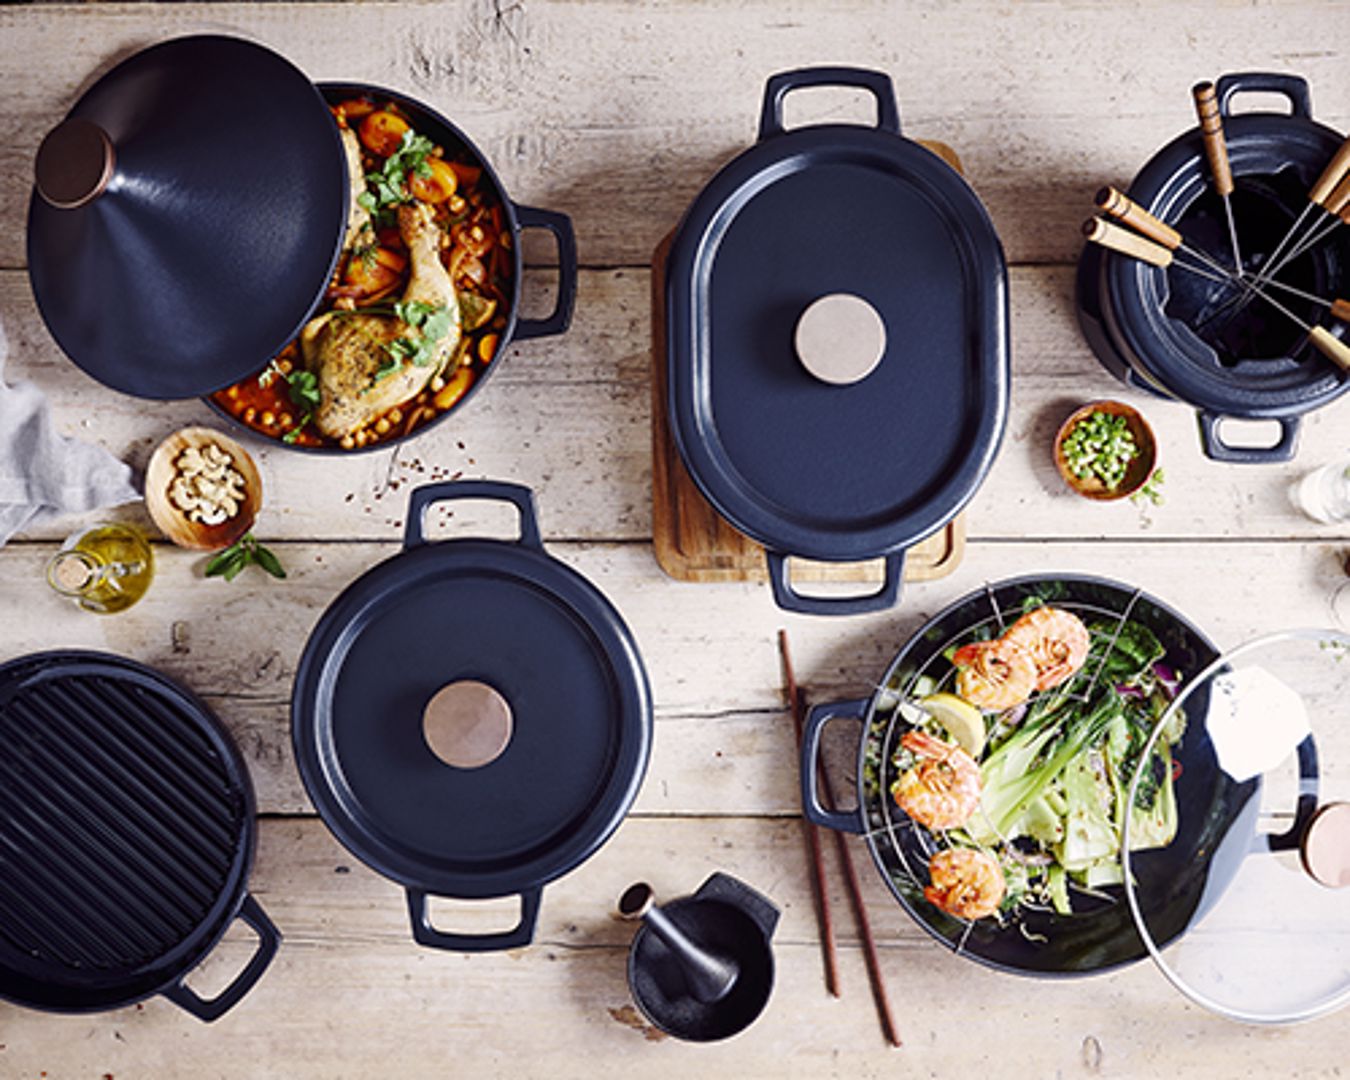 Enjoy all the benefits of cast iron with Nori specialty cookware